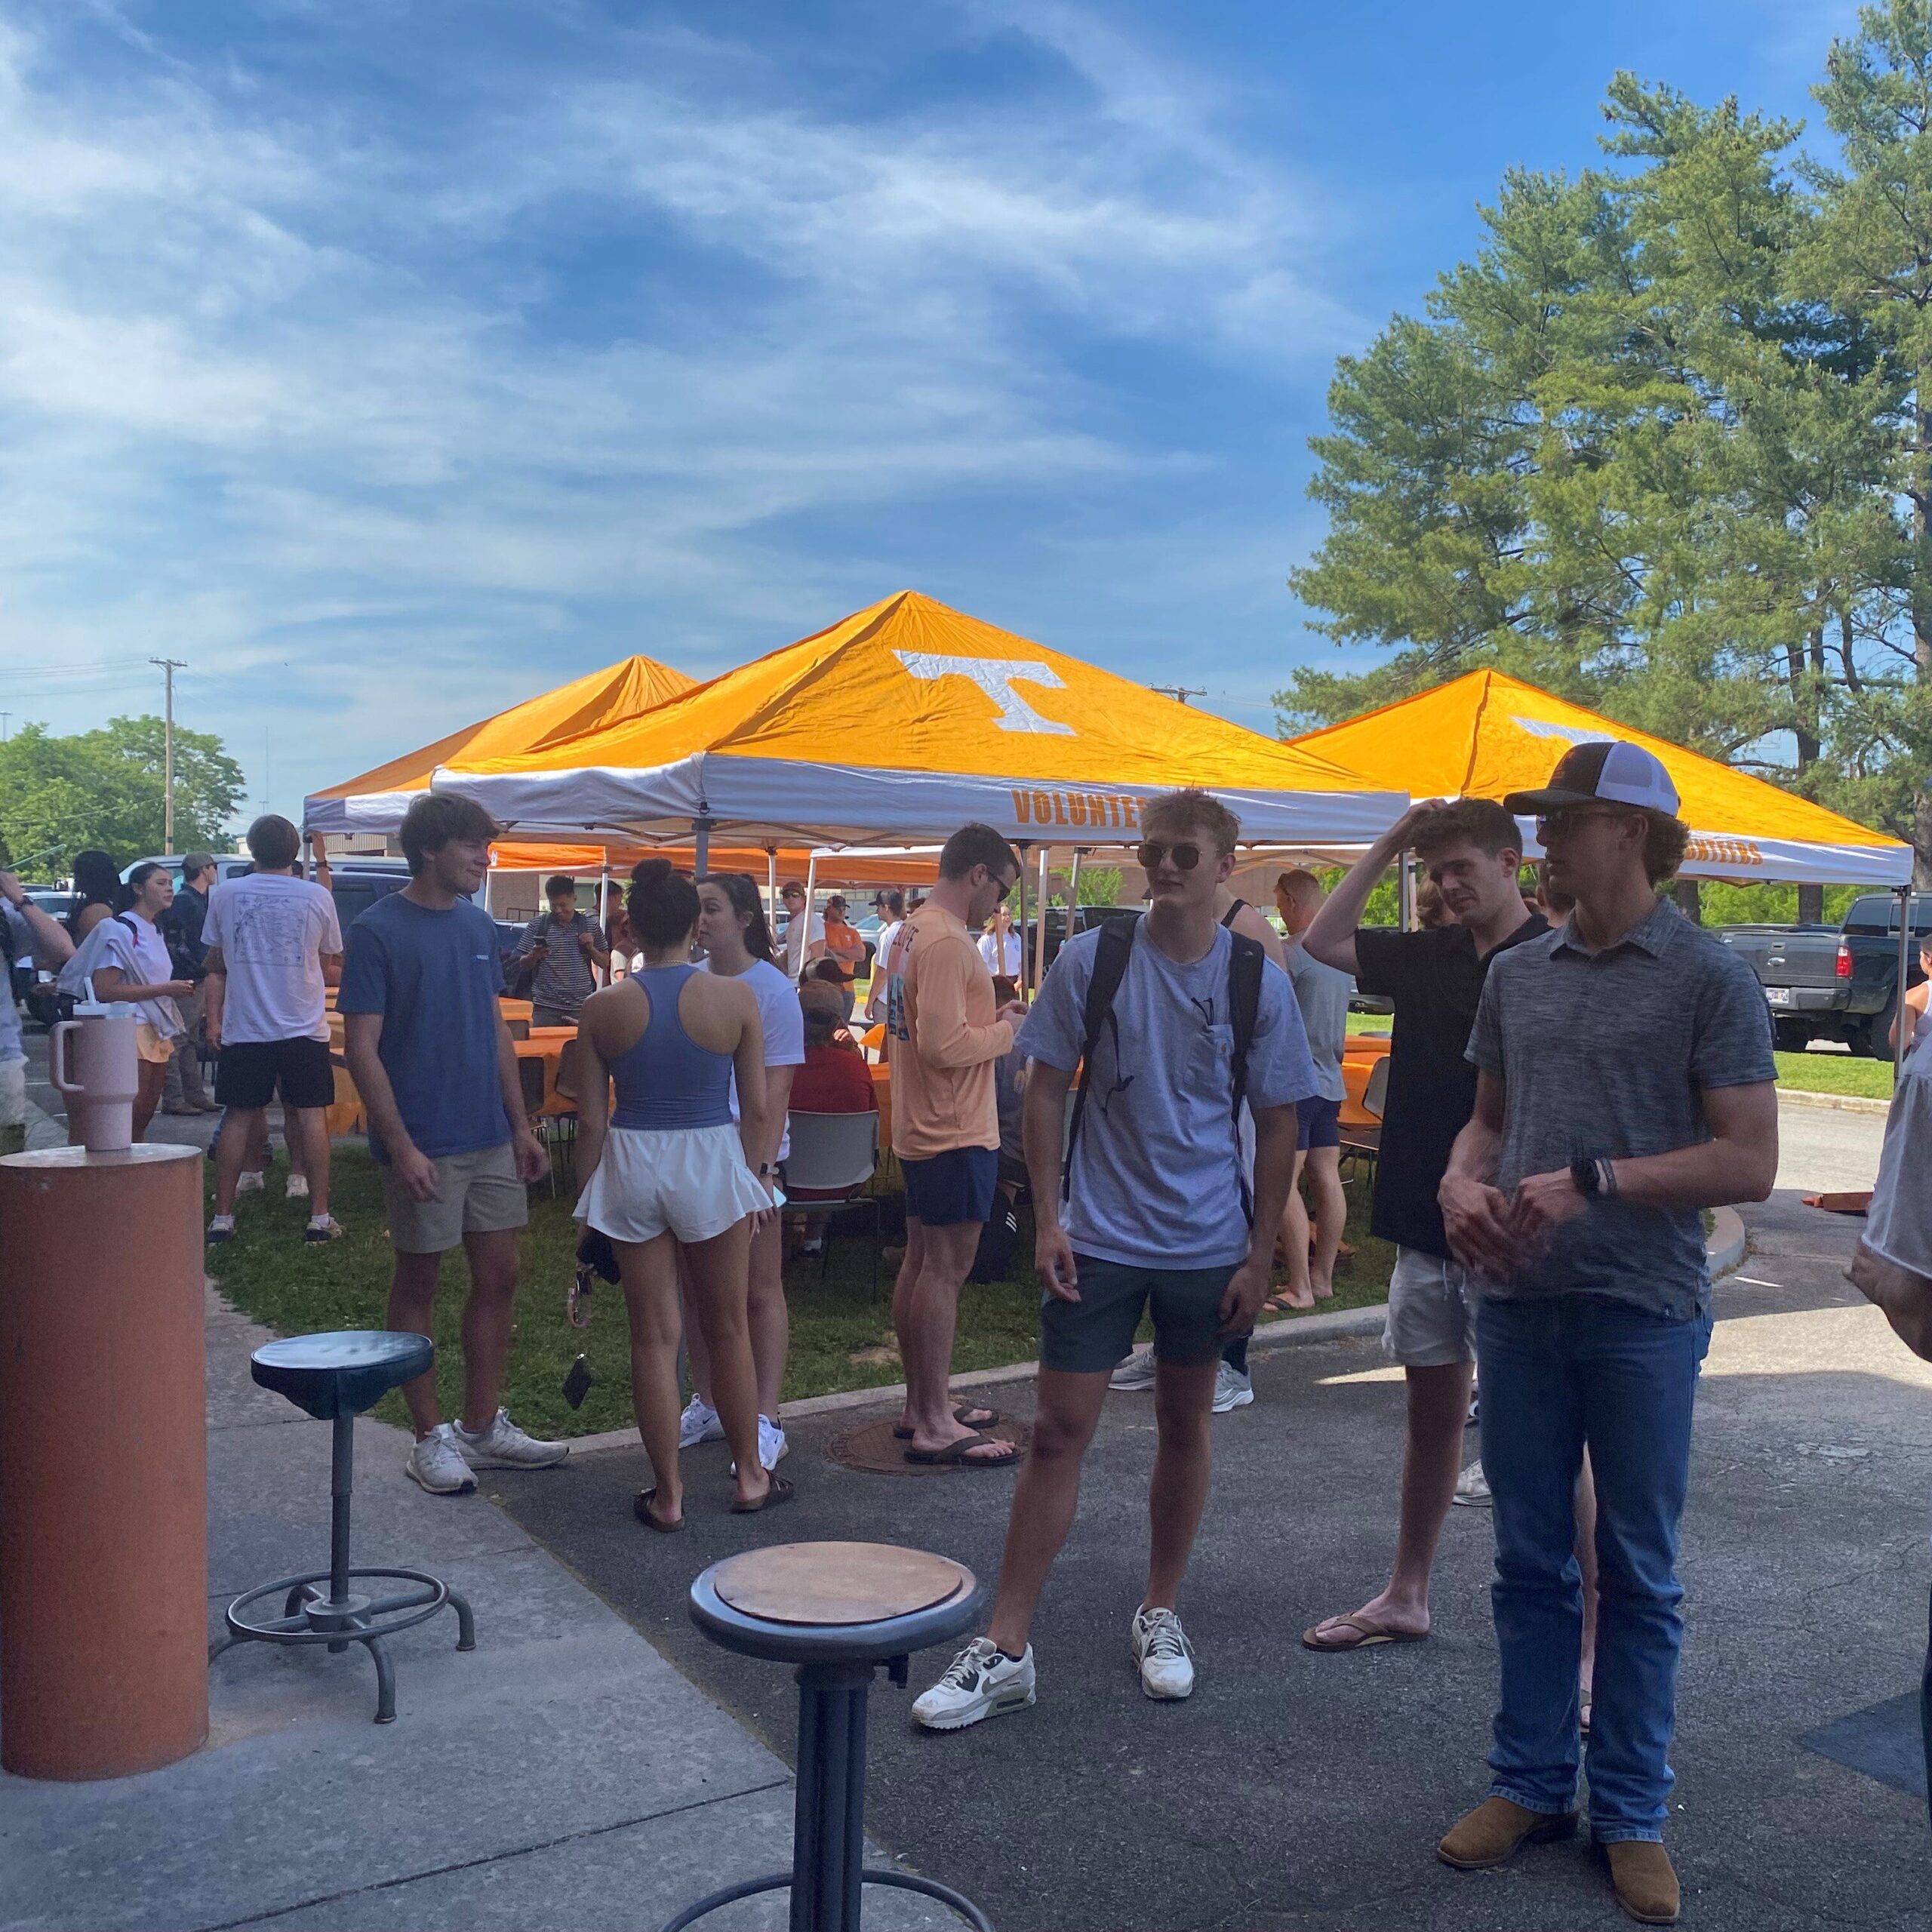 Group of students mingle at an outdoor event with University of Tennessee tents. 